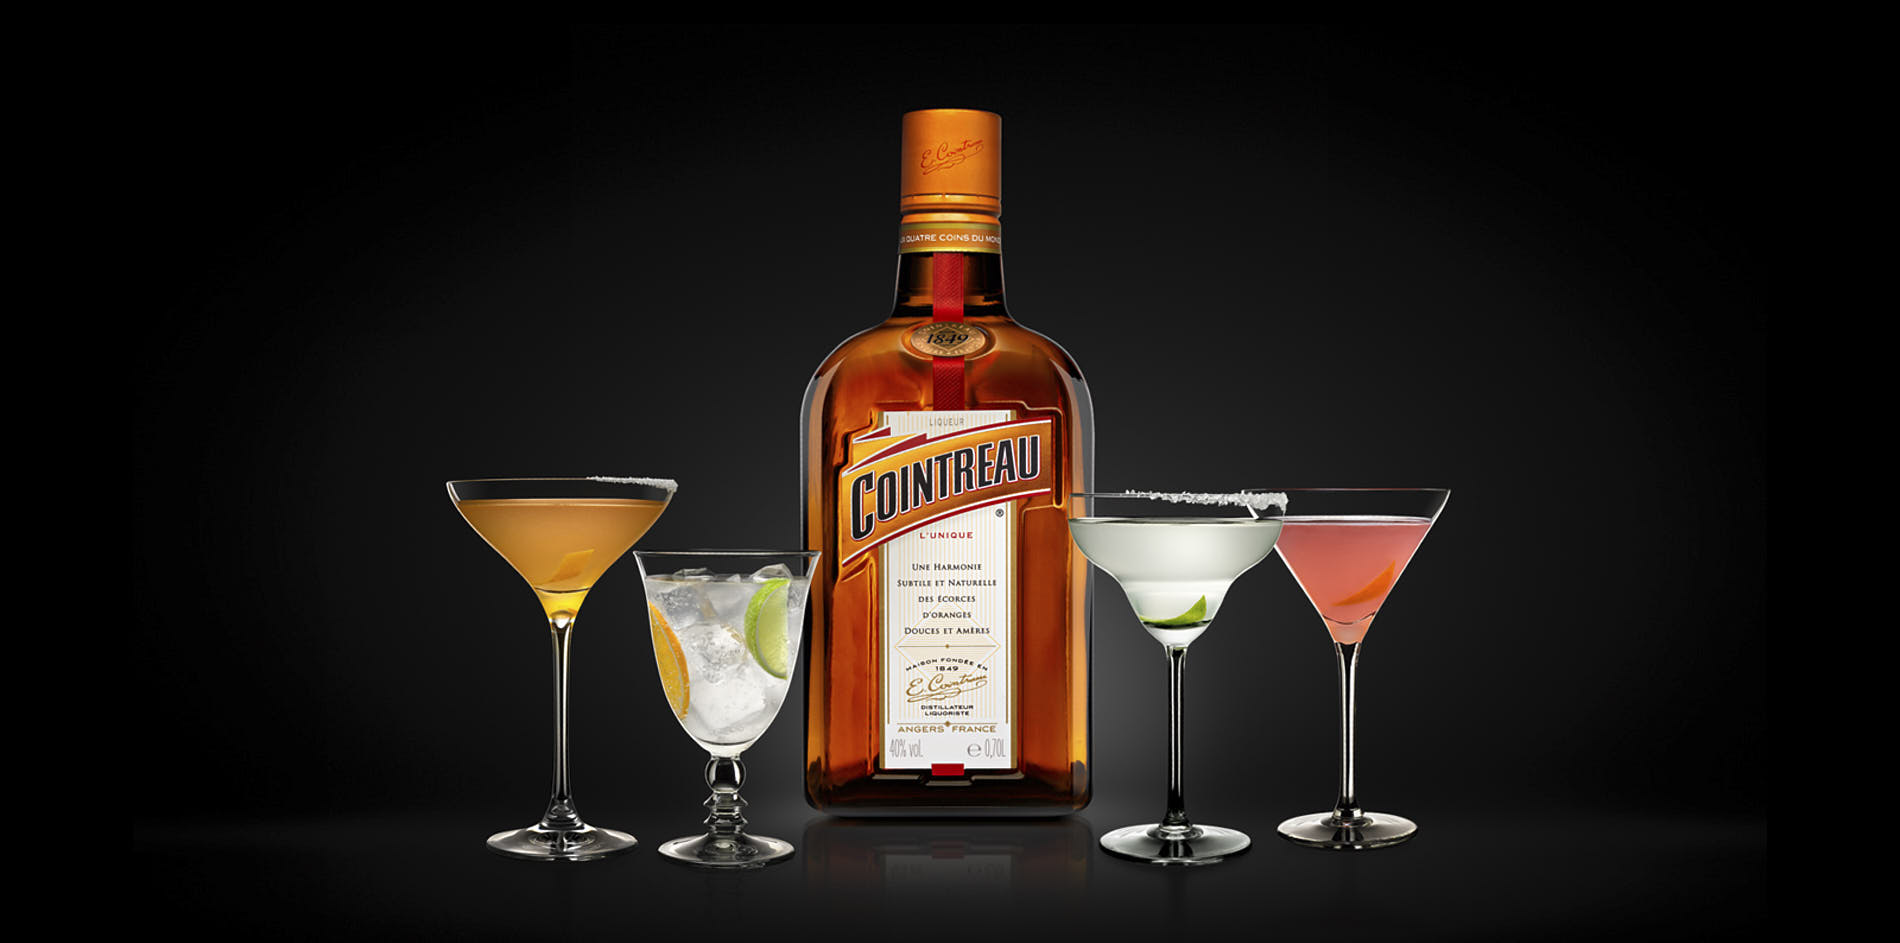 Four Cocktails With Styling And A Bottle Of Cointreau In The Middle